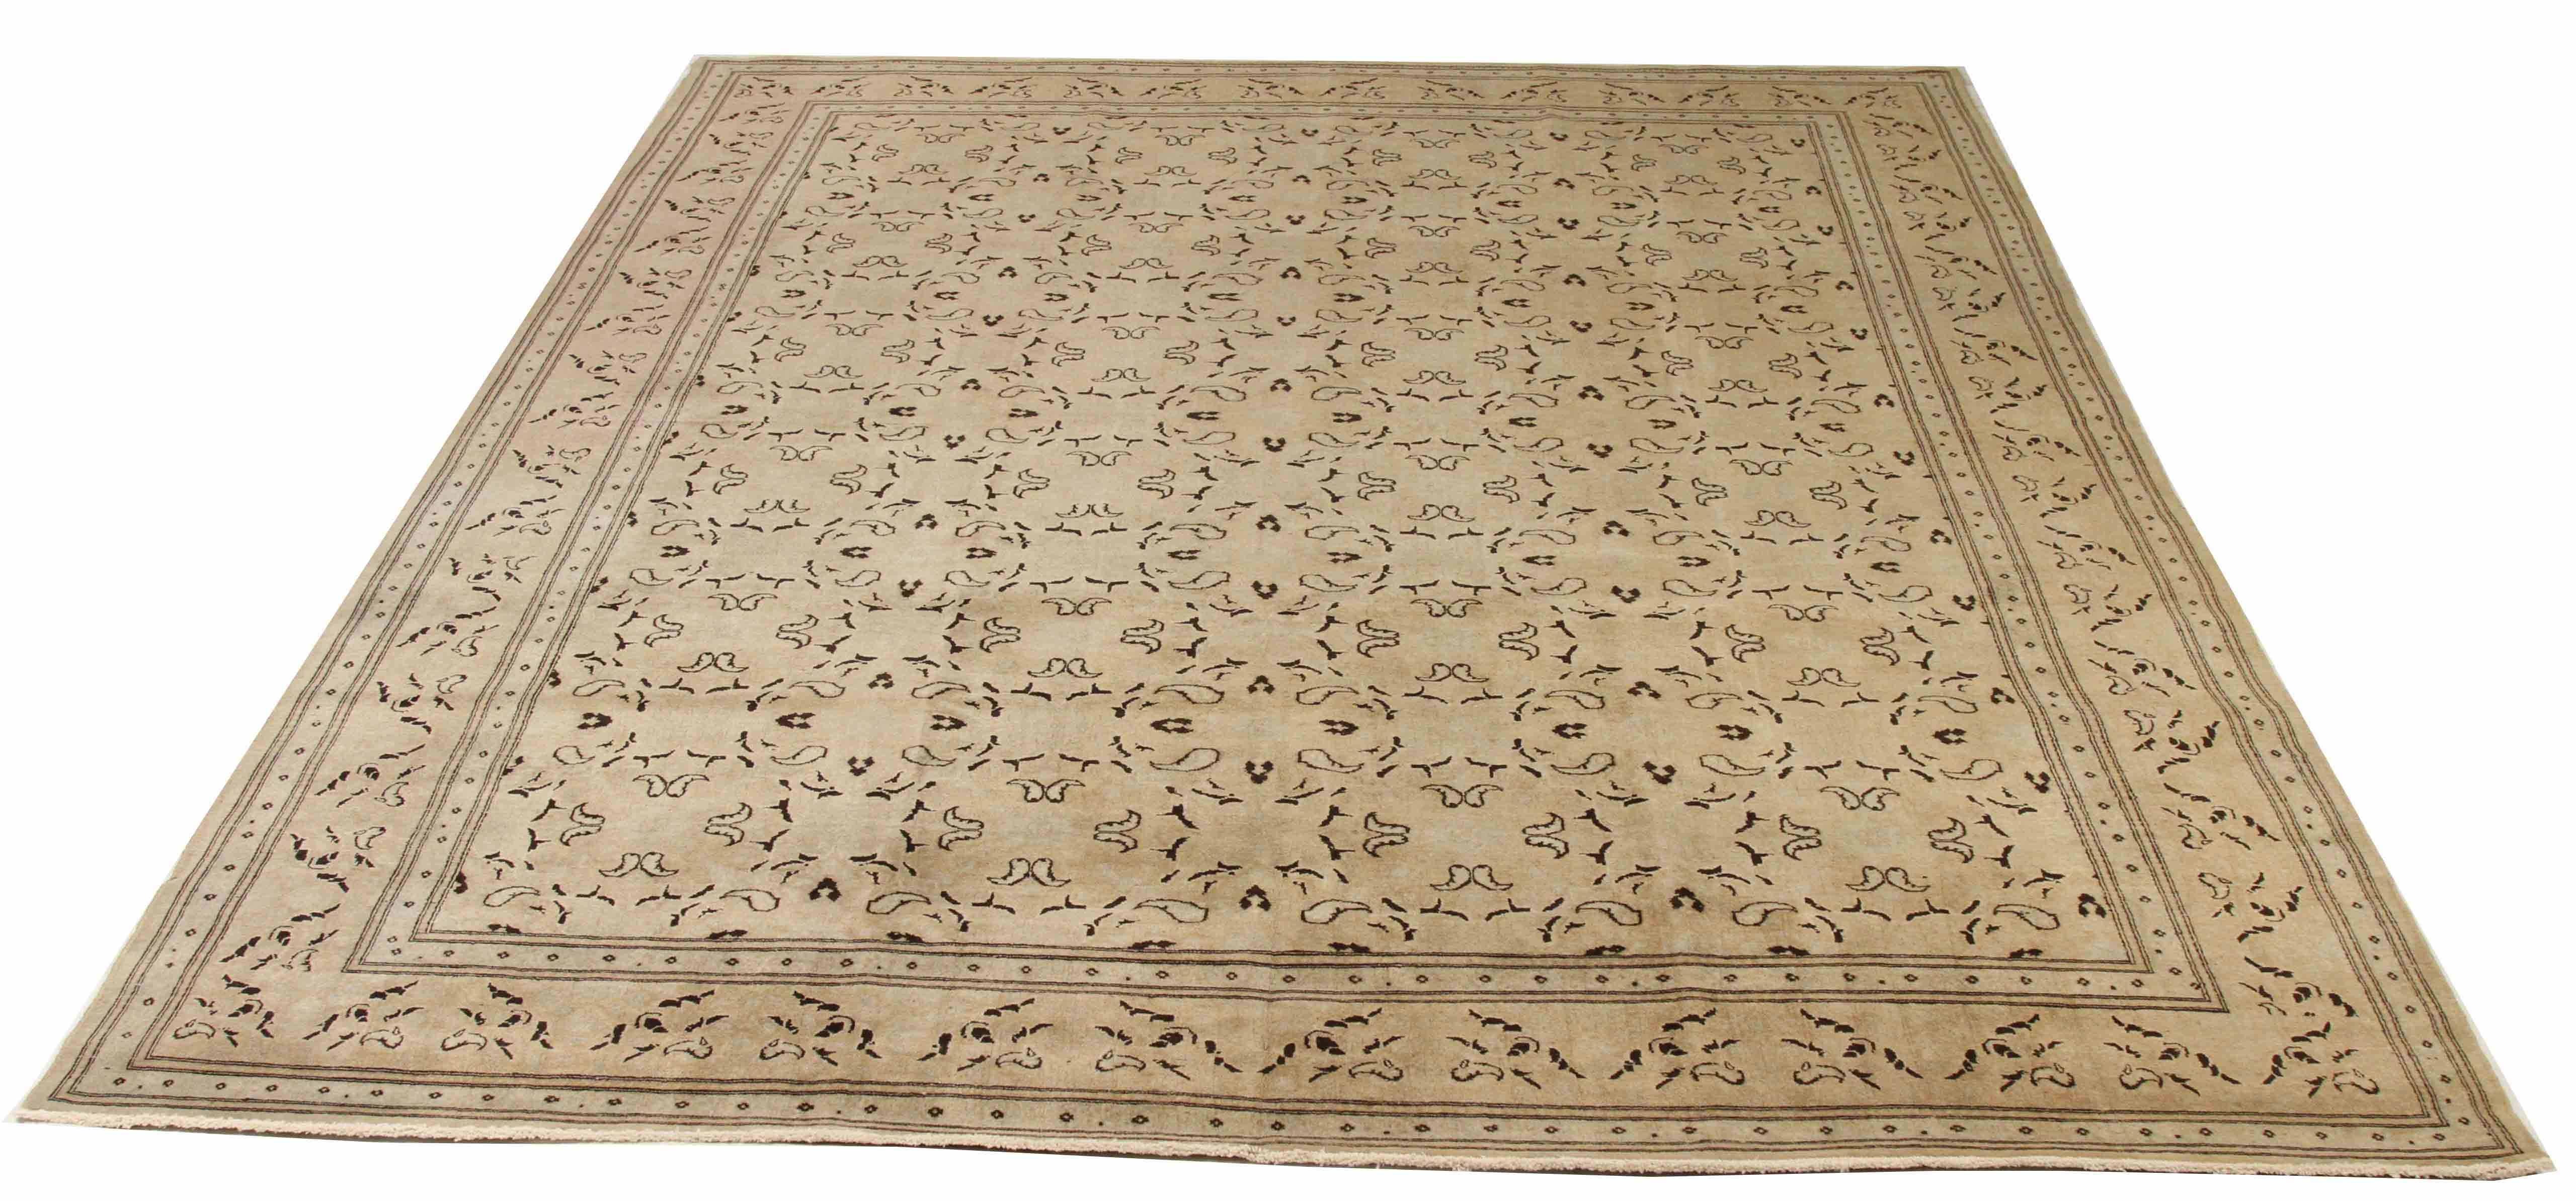 Antique Persian area rug handwoven from the finest sheep’s wool. It’s colored with all-natural vegetable dyes that are safe for humans and pets. It’s a traditional Dorokhsh design handwoven by expert artisans. It’s a lovely area rug that can be